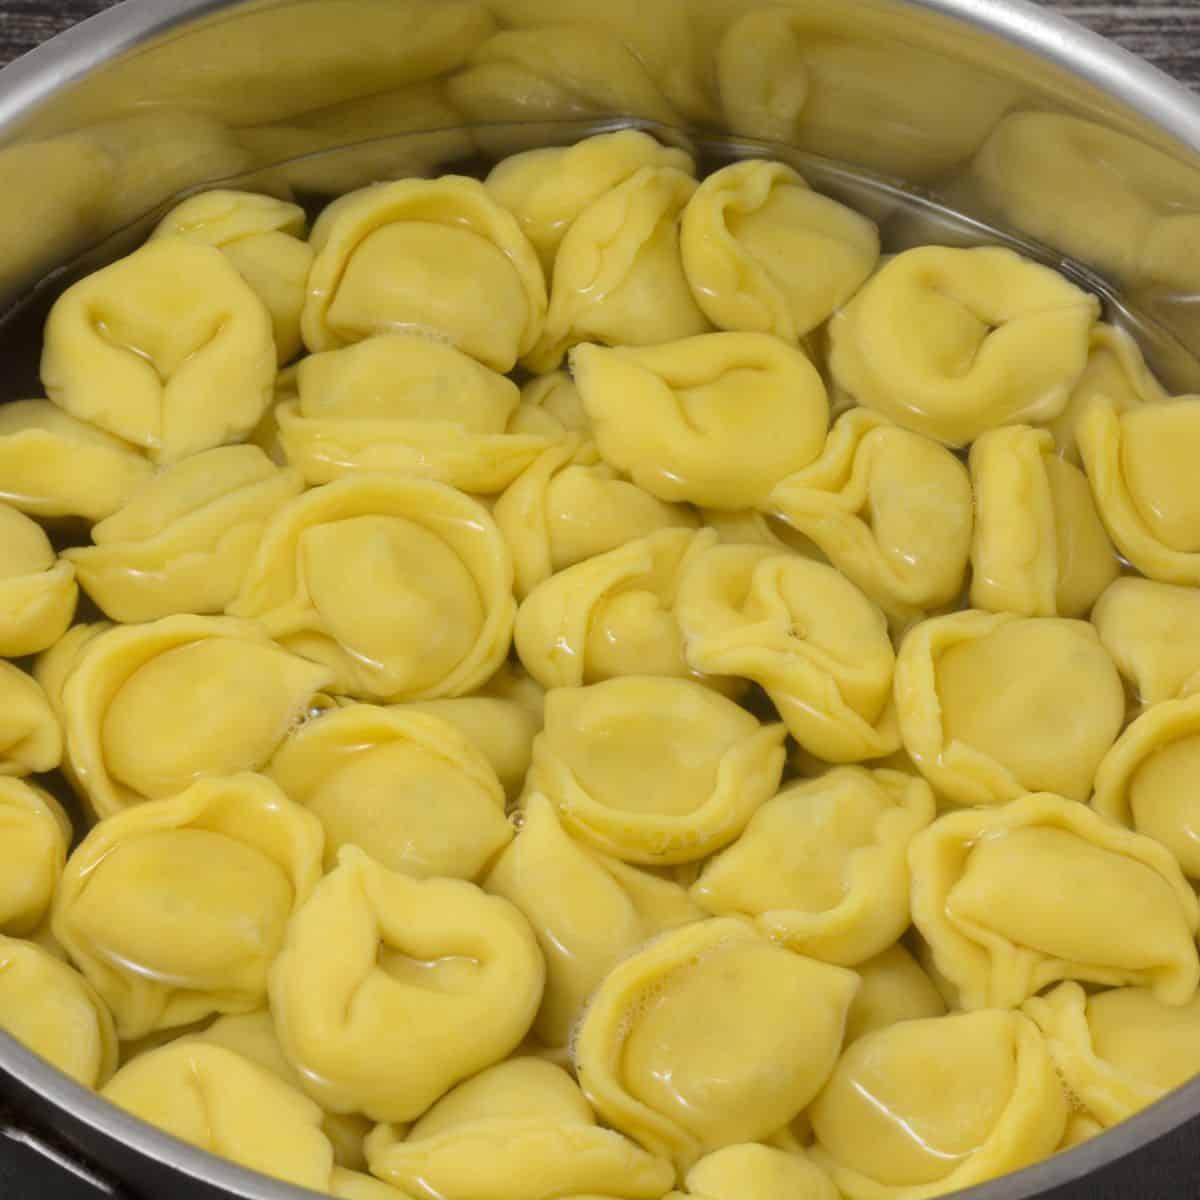 Tortellini pasta floats in a pot of water.